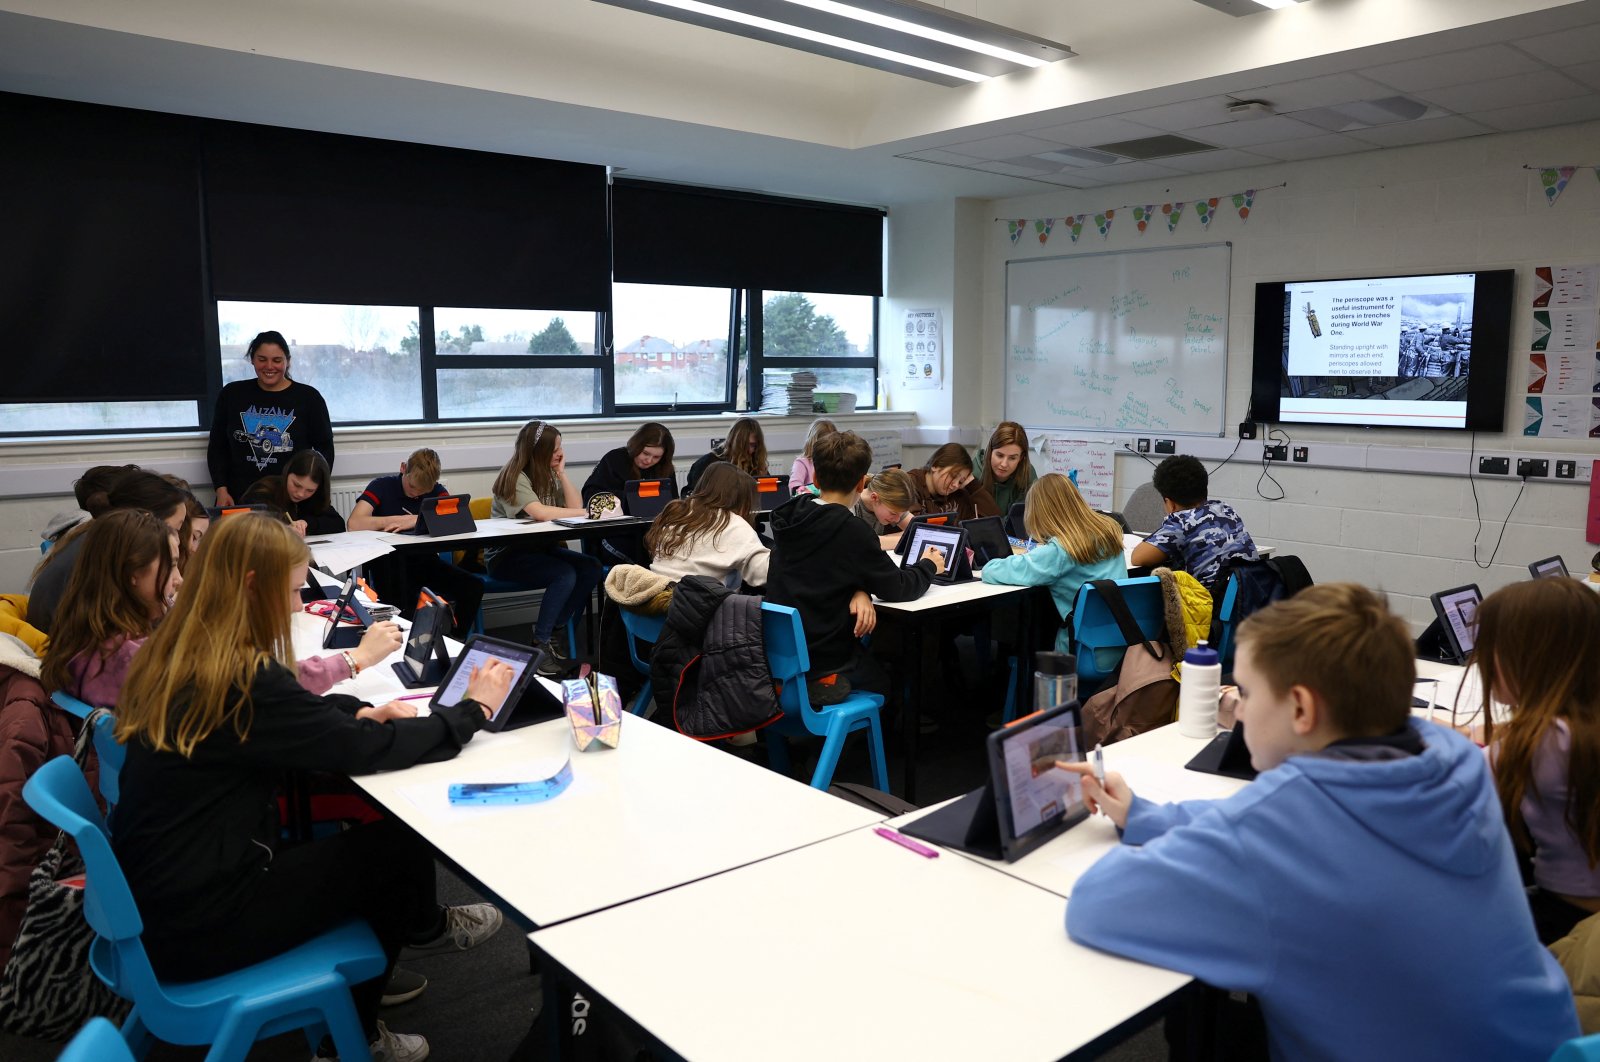 Pupils attend a lesson, at XP East High School, in Doncaster, Britain, Feb. 20, 2023. (Reuters Photo)